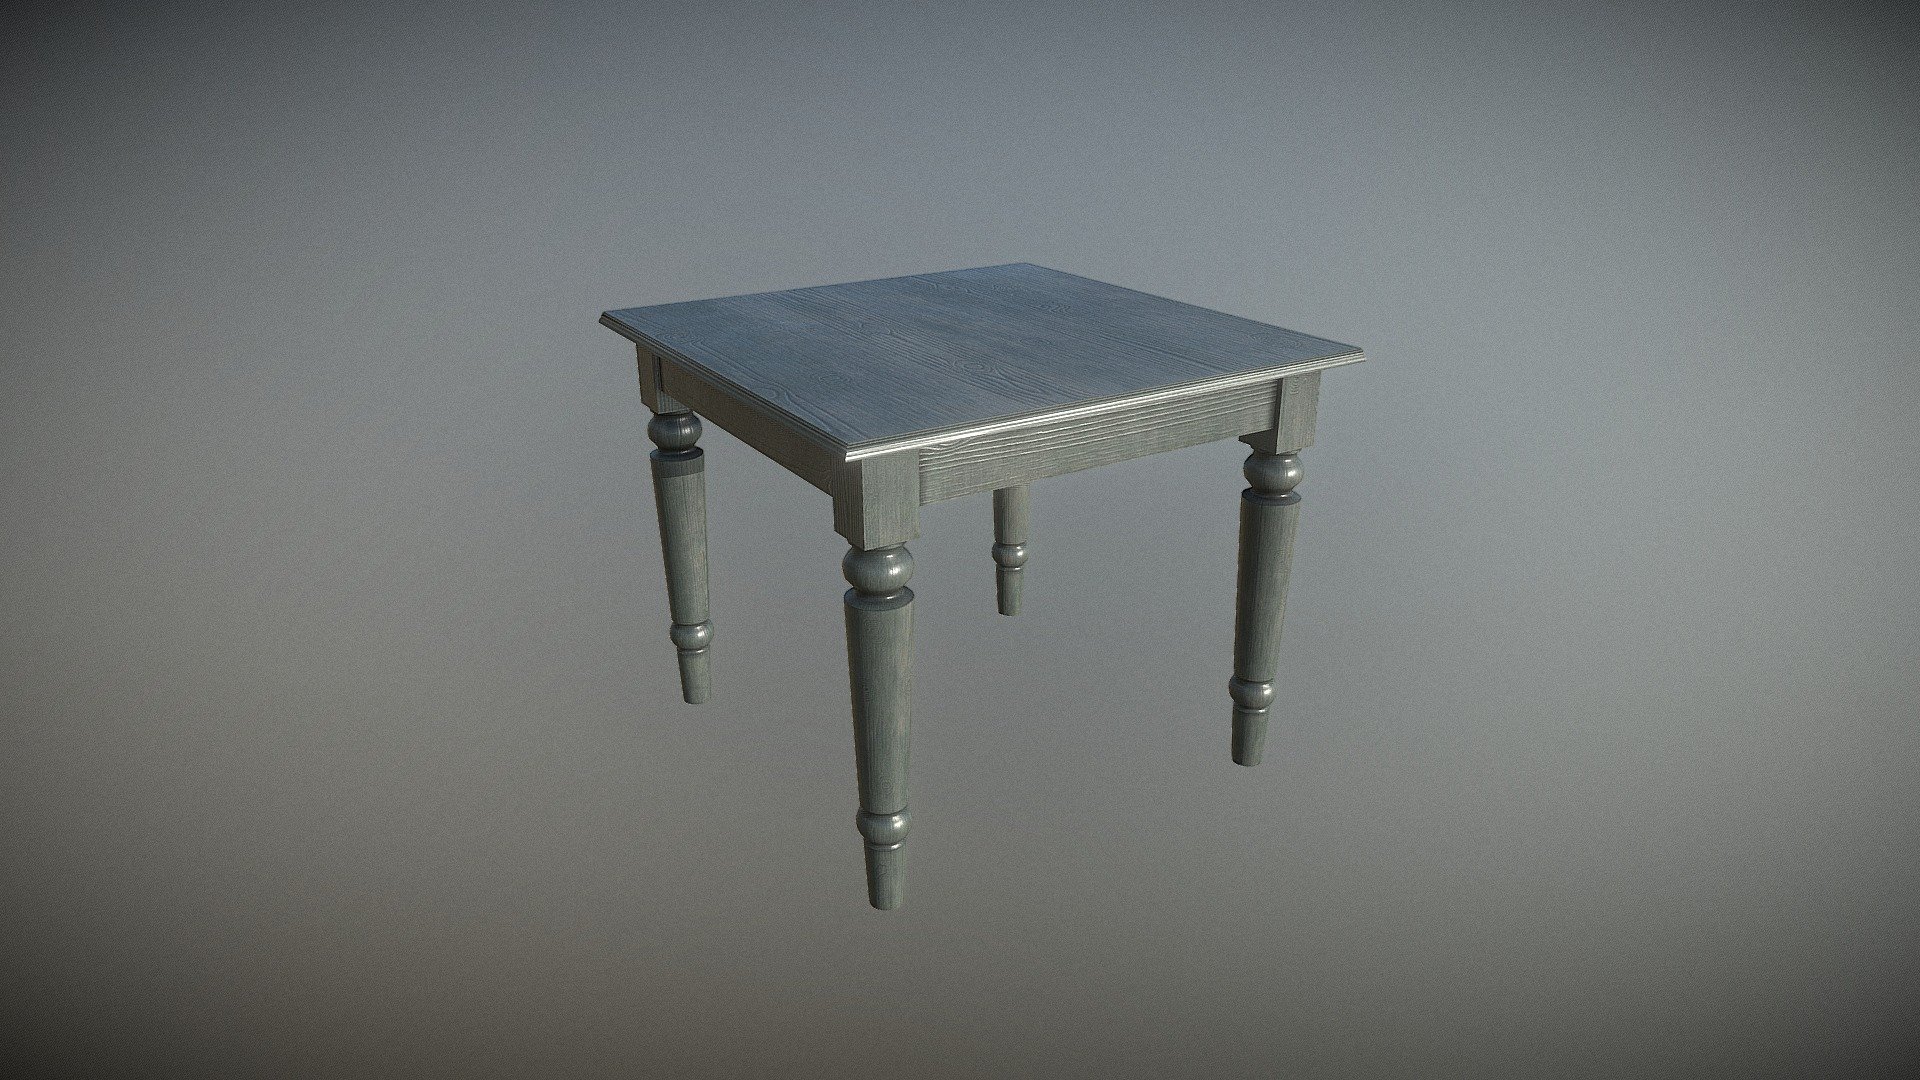 The model is made on the basis of an antique table from the first half of the 20th century. This is part of a future furniture package 3d model